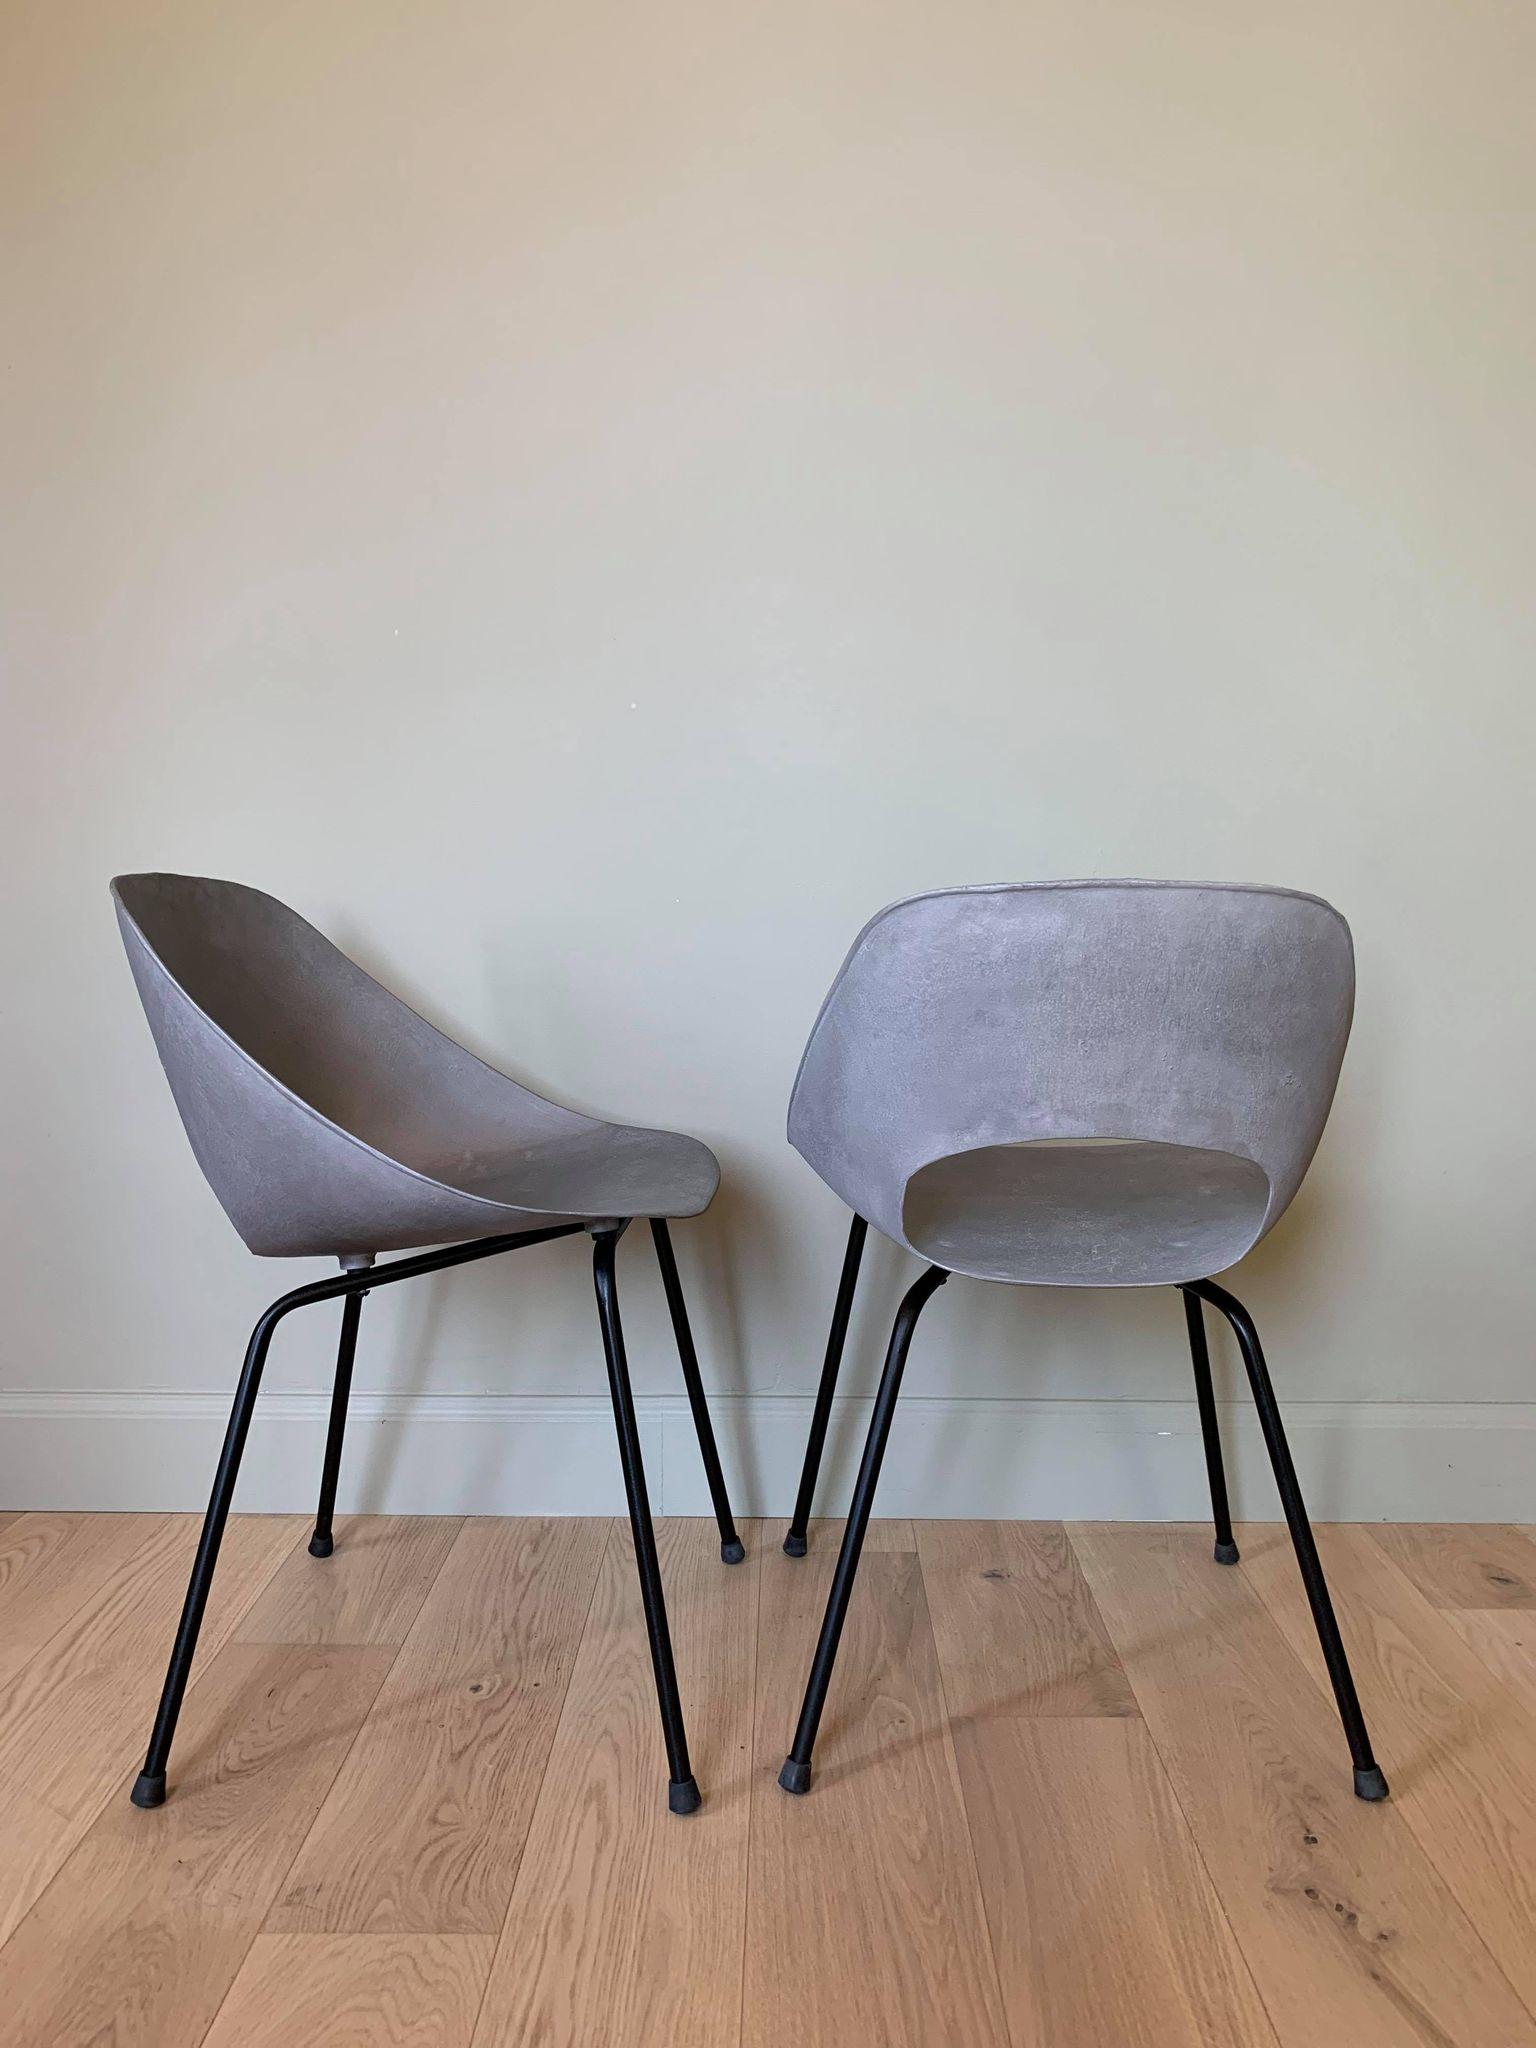 Pair of mid-century aluminium chairs by Pierre Guariche for Steiner - France 1953.